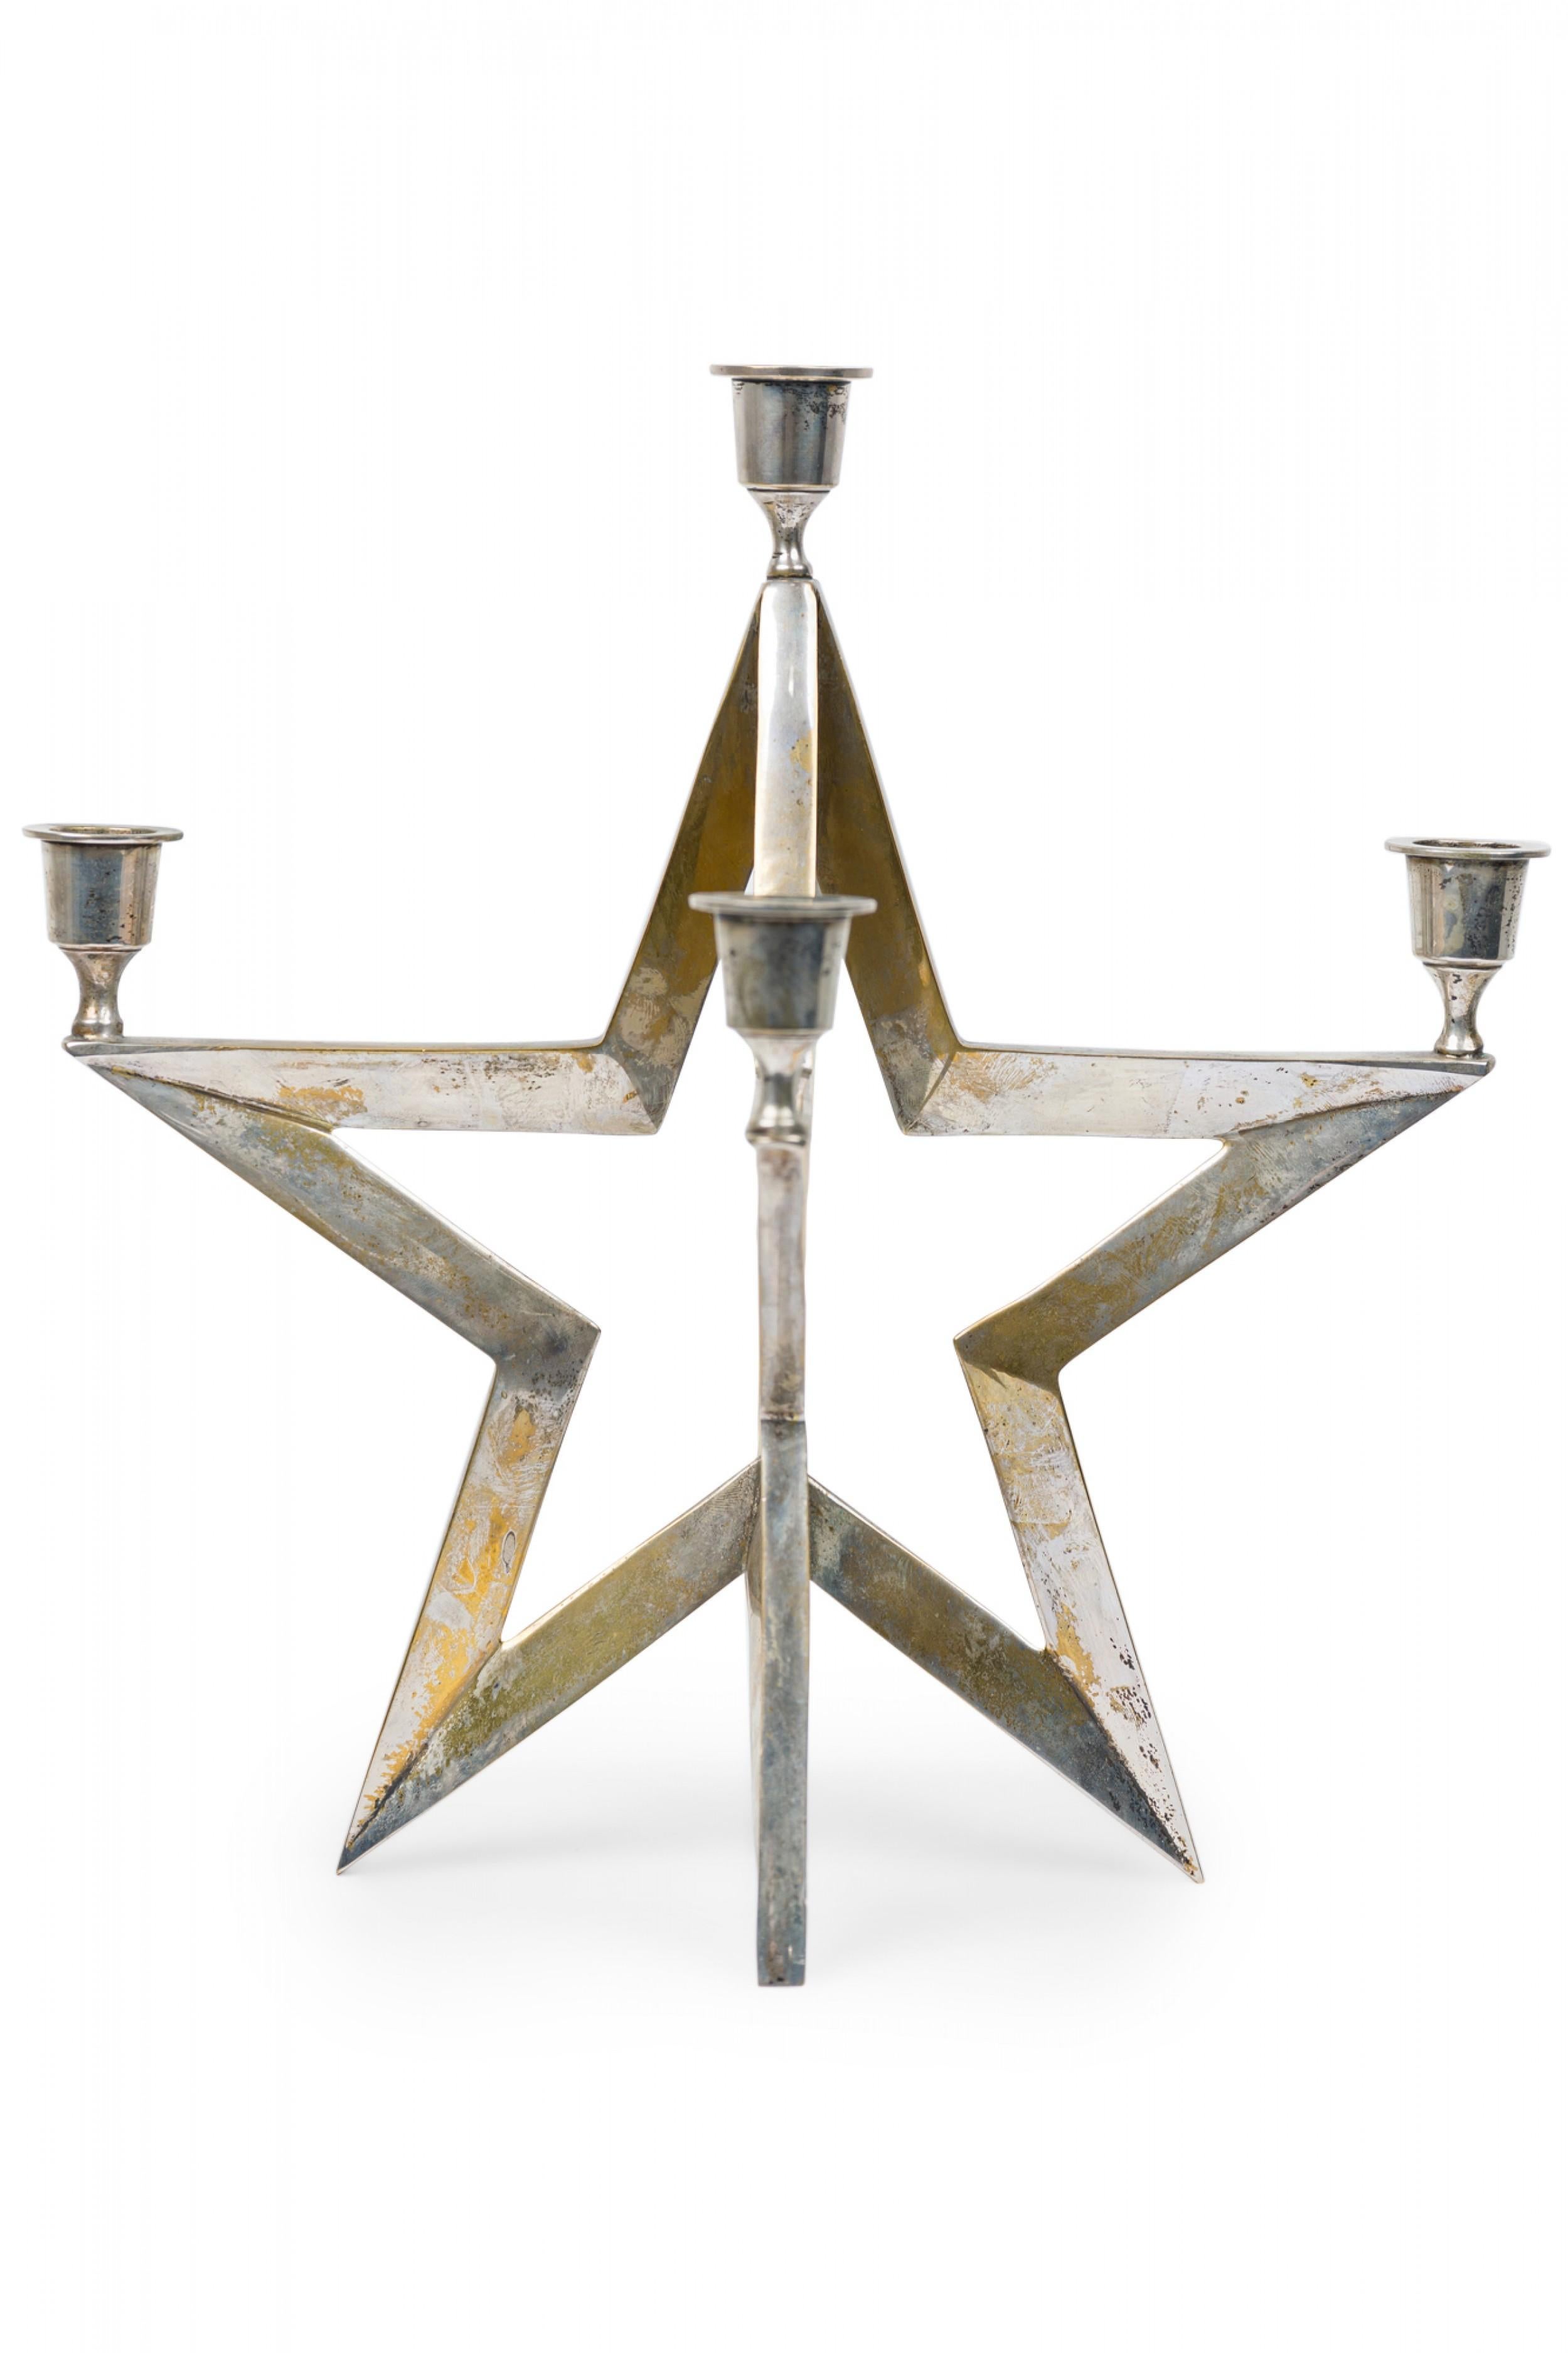 Contemporary American star form metal candle with 5 arms with candle cups.